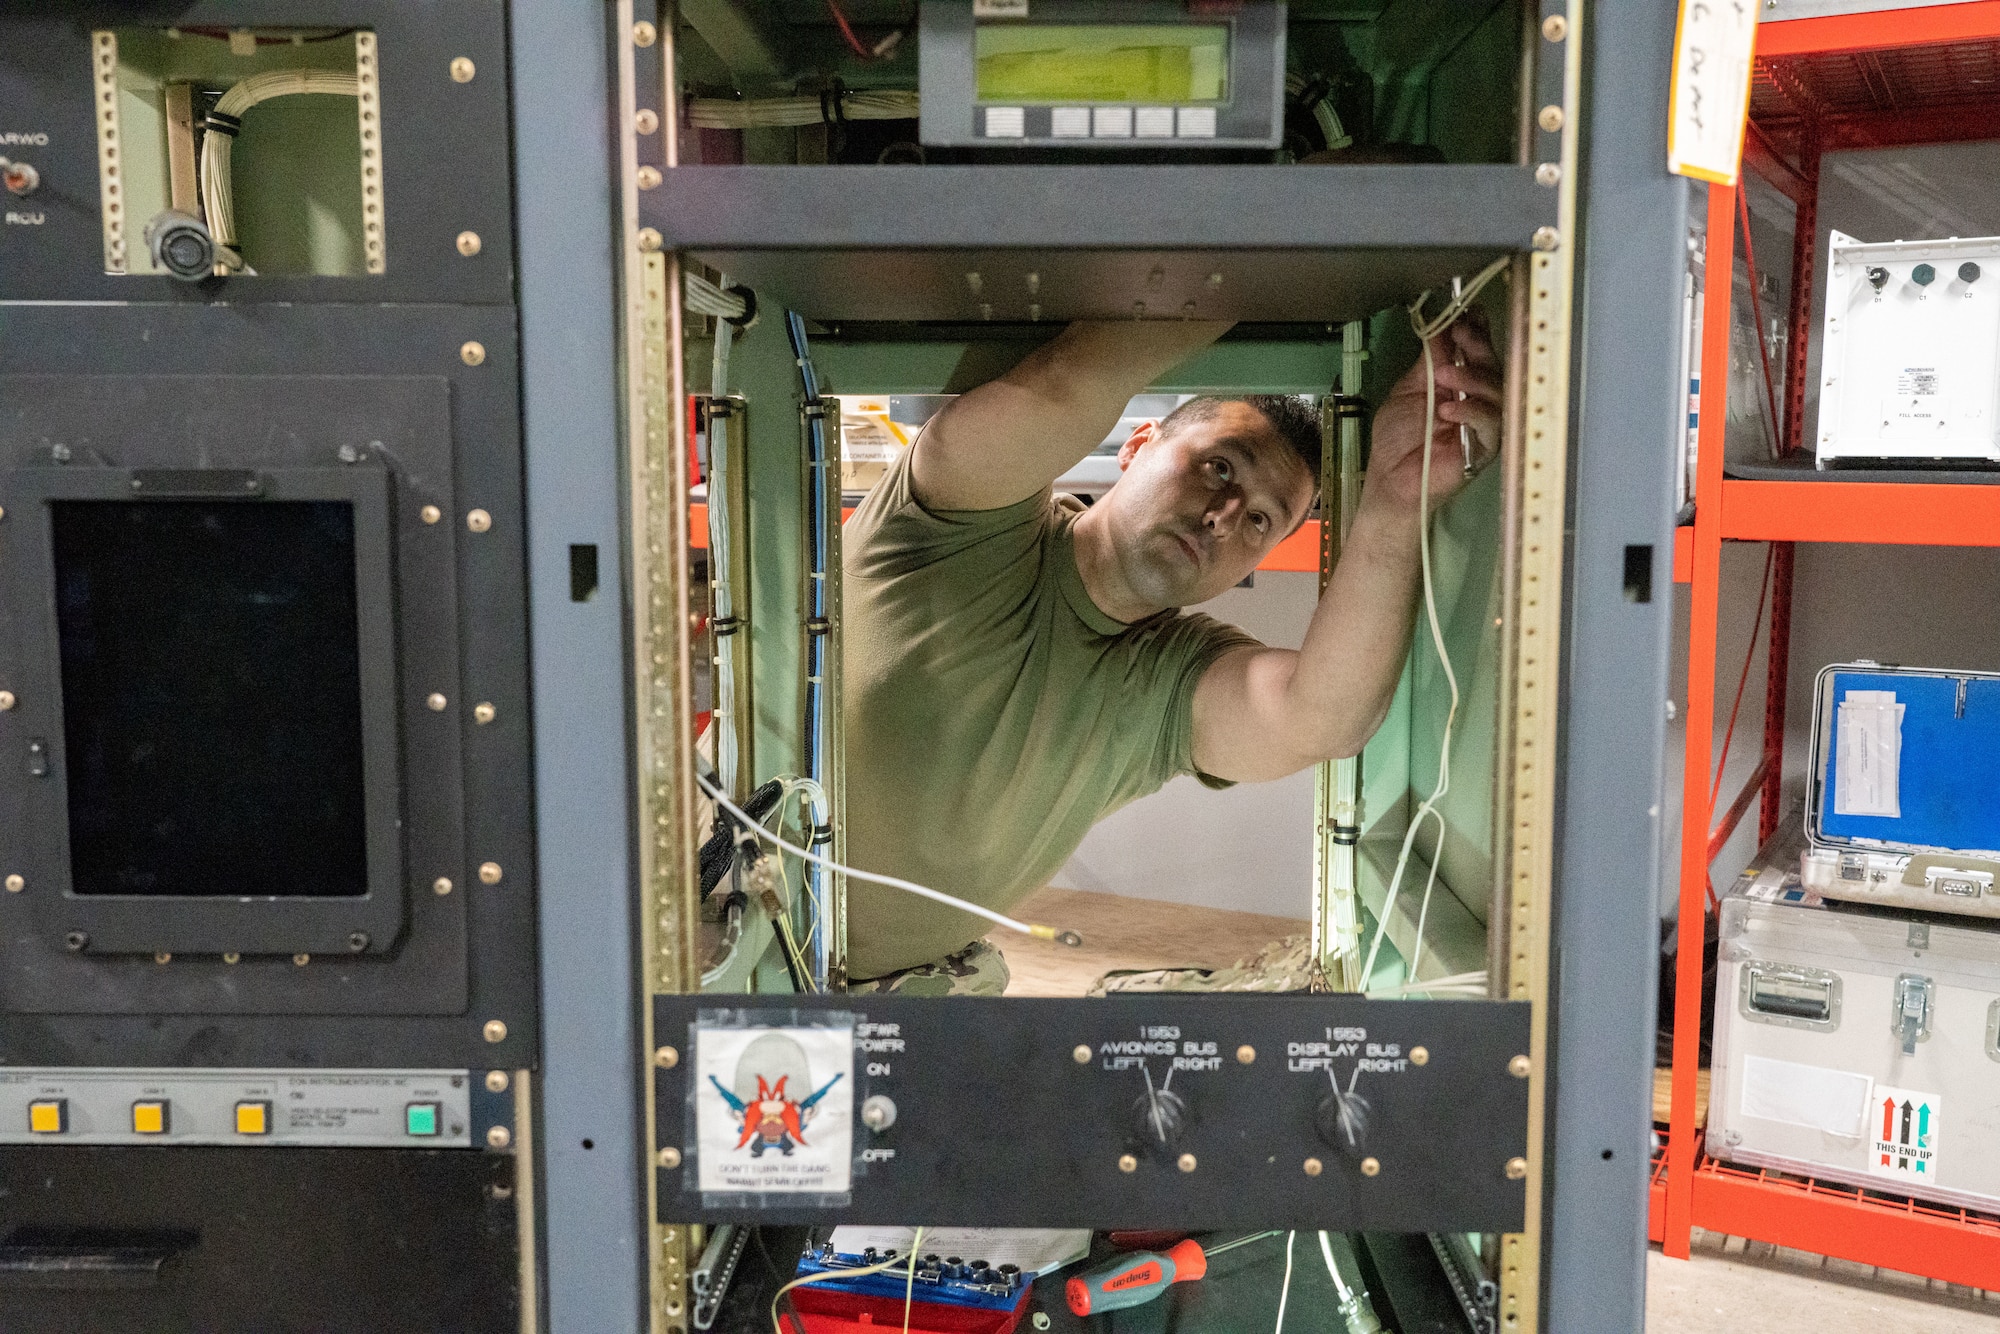 Senior Airman Warren Reynier, 403rd Maintenance Squadron meteorology technician, works on the internal wiring of the aerial reconnaissance weather officer station at Keesler Air Force Base, Miss., May 12, 2021. The 53rd Weather Reconnaissance Squadron “Hurricane Hunters’” ARWO and loadmaster/dropsonde operator stations are being upgraded with hardware and software to increase their weather collecting capabilities. (U.S. Air Force photo by 2nd Lt. Christopher Carranza)